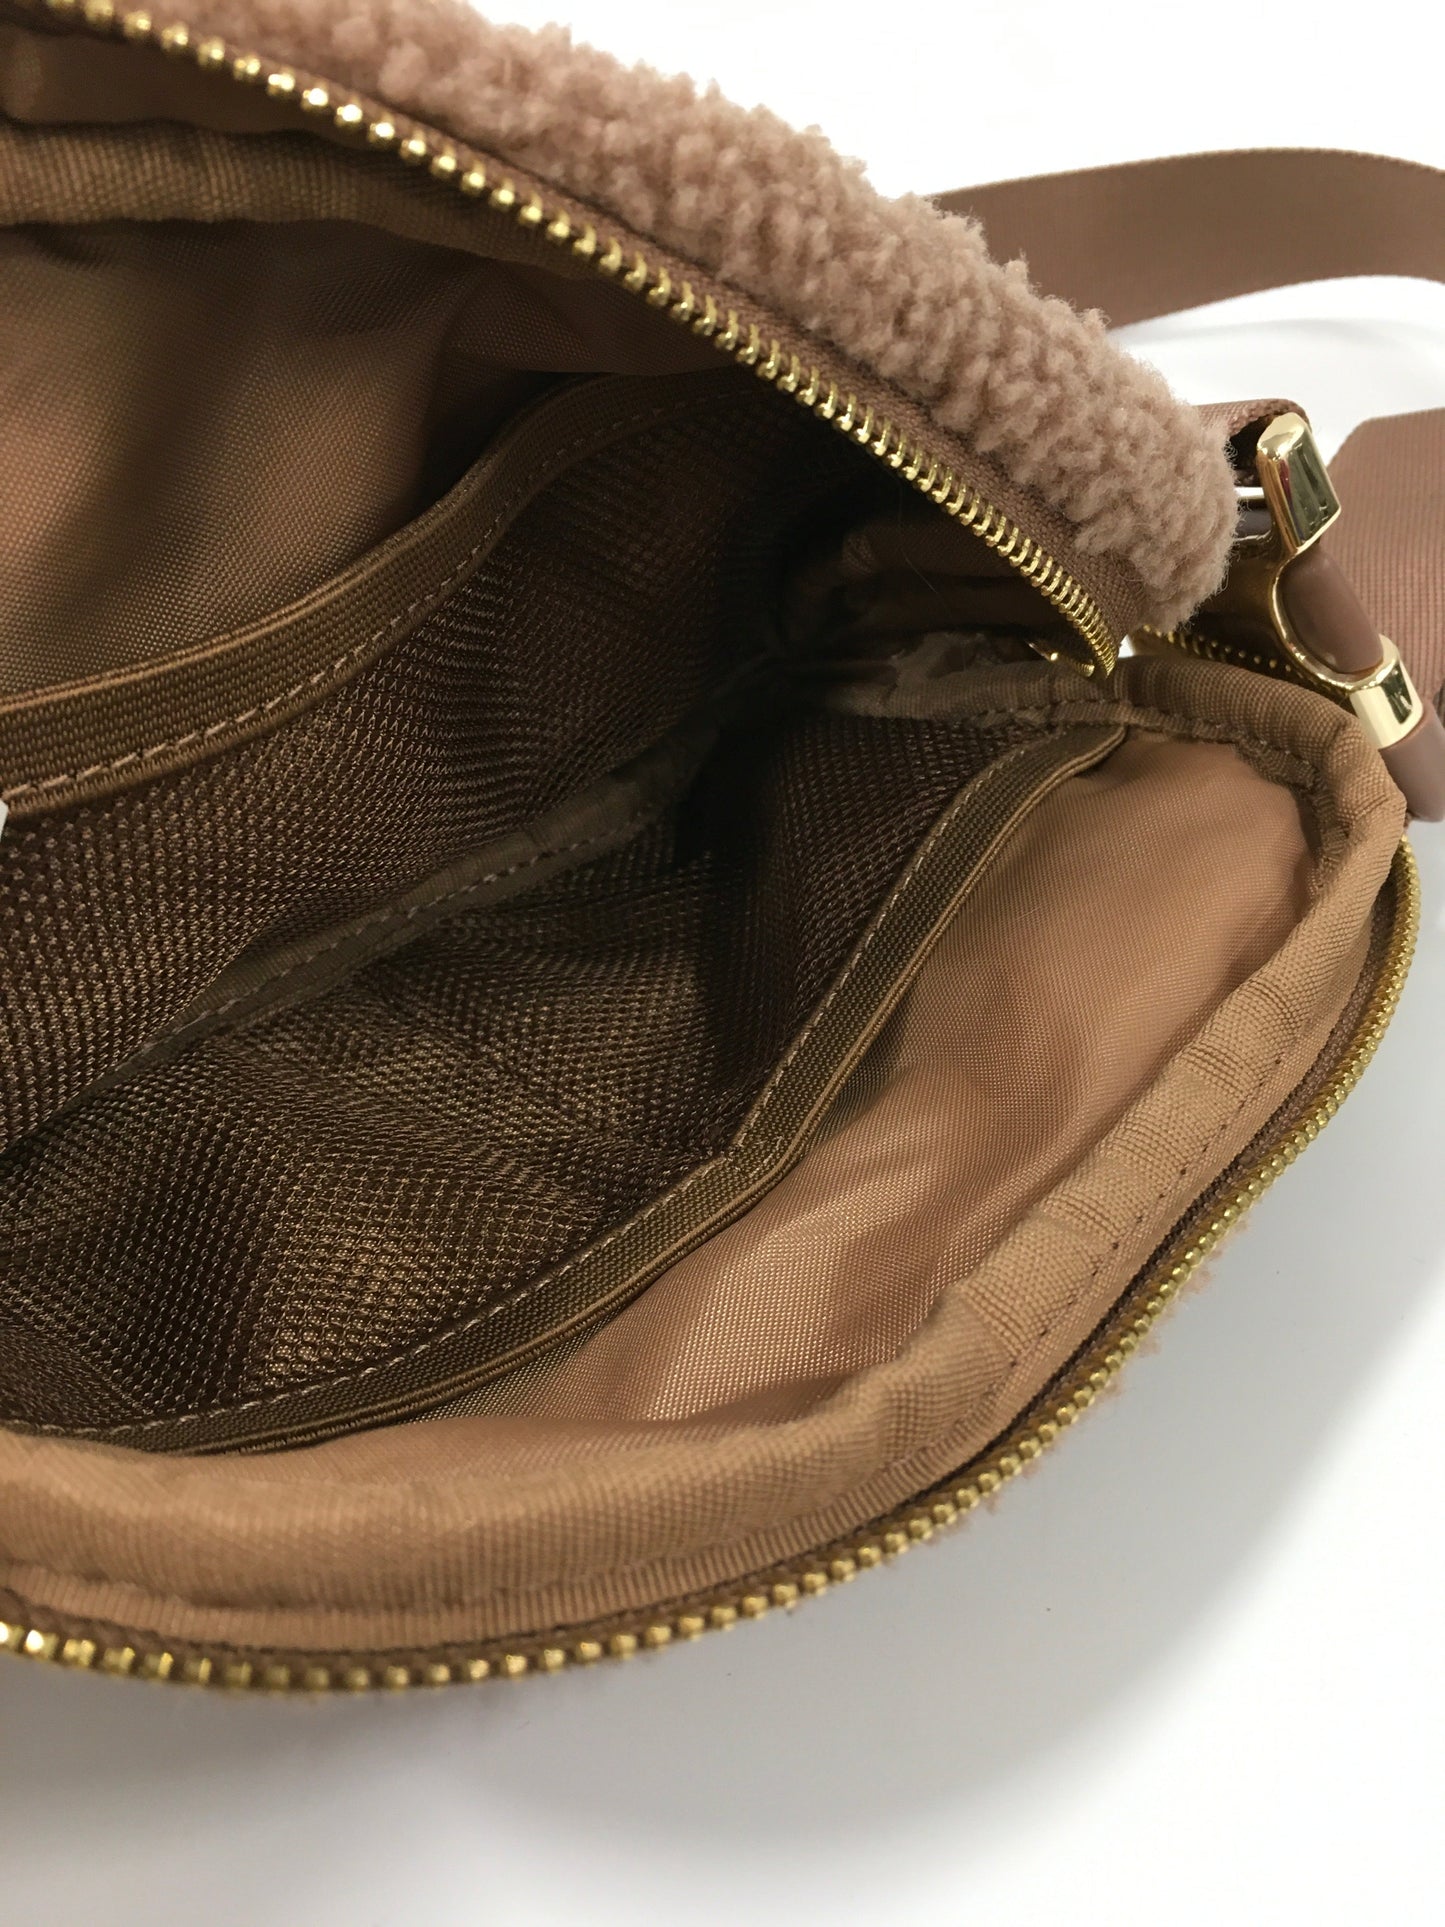 Beltbag By Clothes Mentor  Size: Small